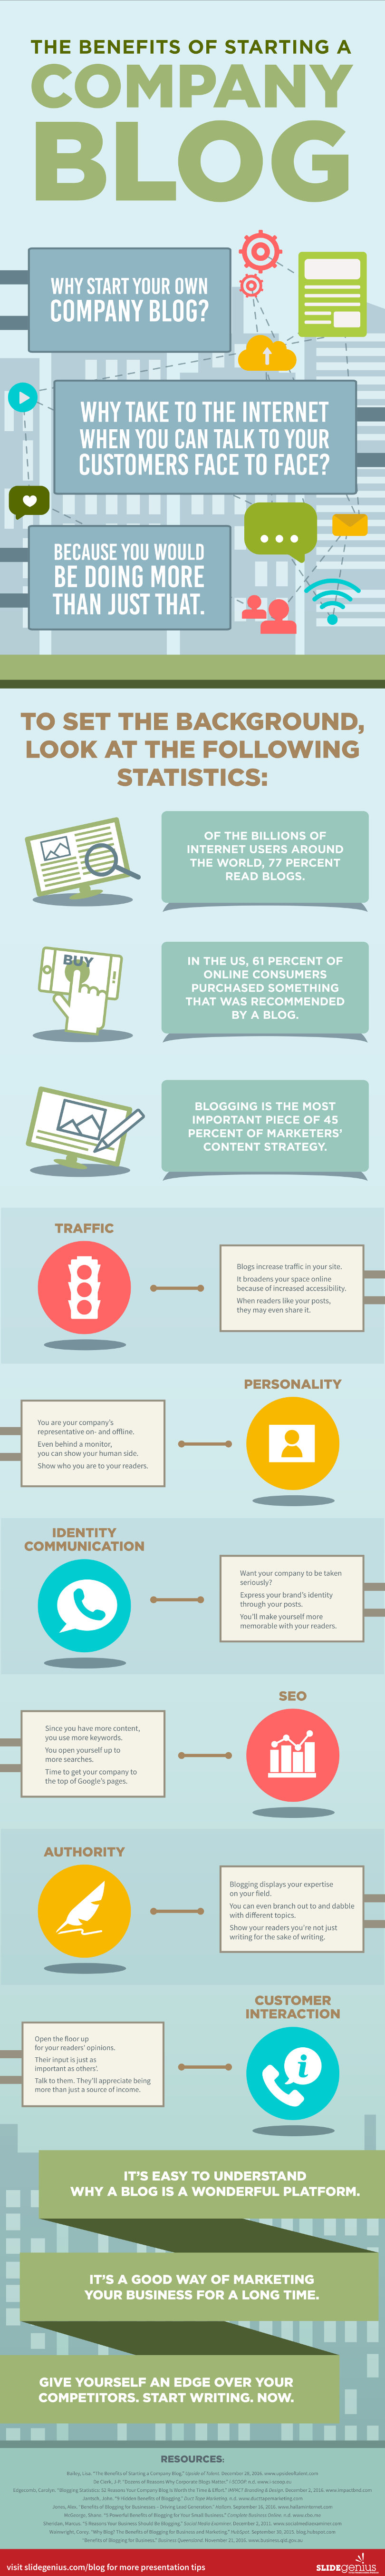 The benefits of starting a company blog - infographic